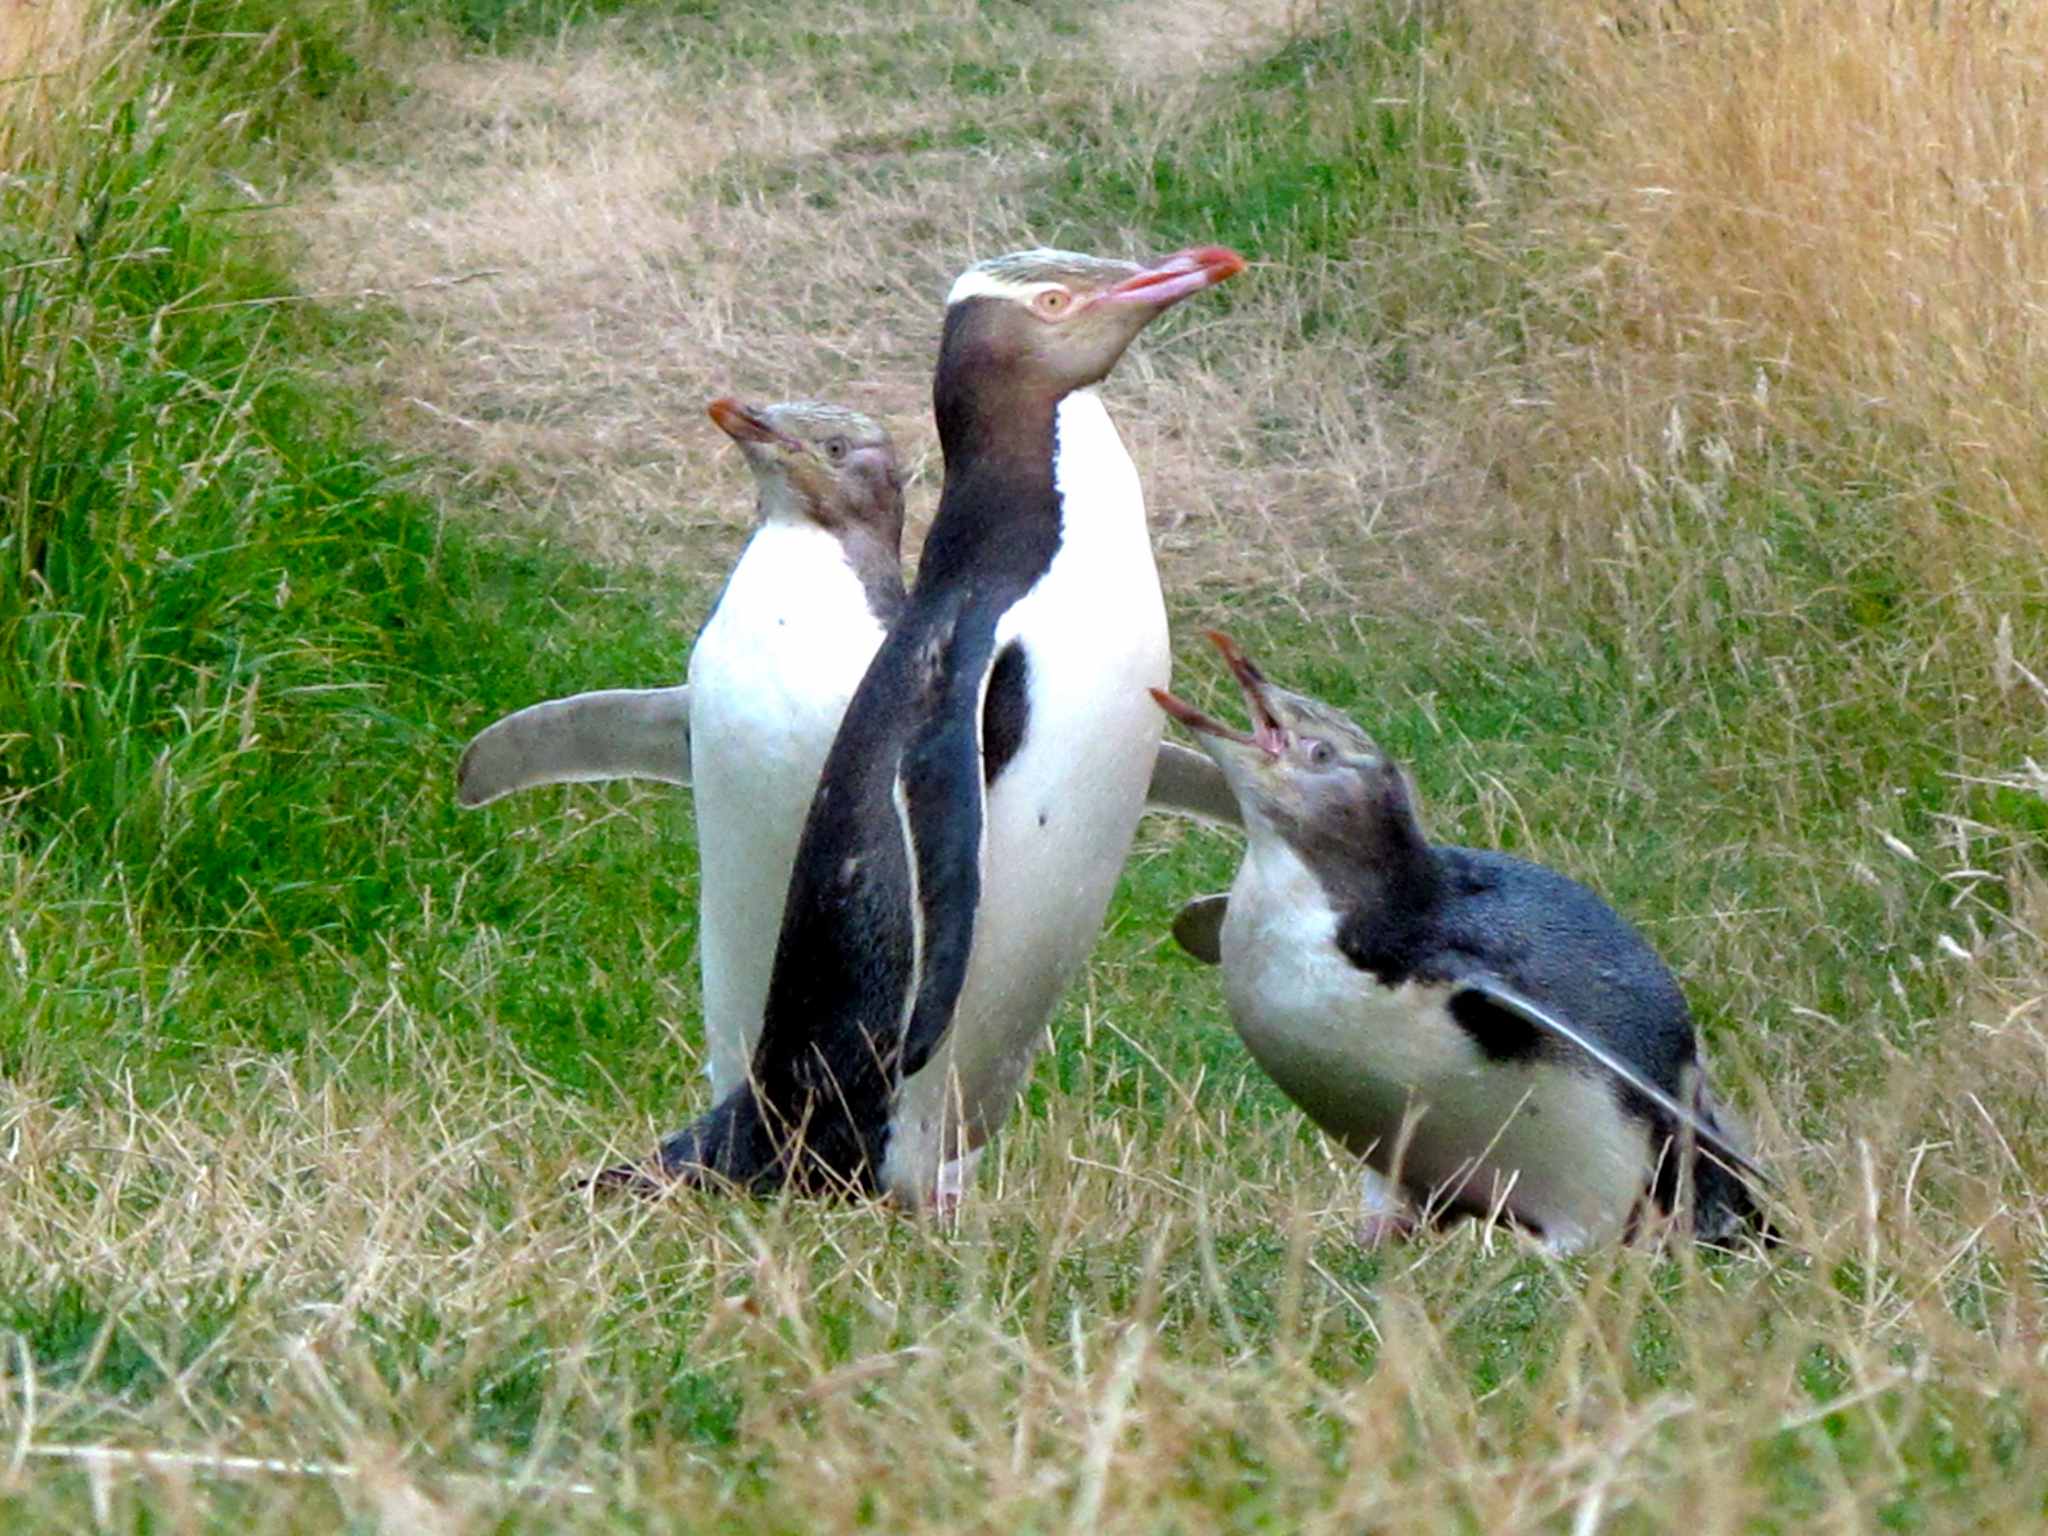 https://nzfrenzysouth.files.wordpress.com/2013/06/katiki-pt-penguin-family-hanging-out-on-the-human-walking-track-a-couple-hours-before-sunset.jpg